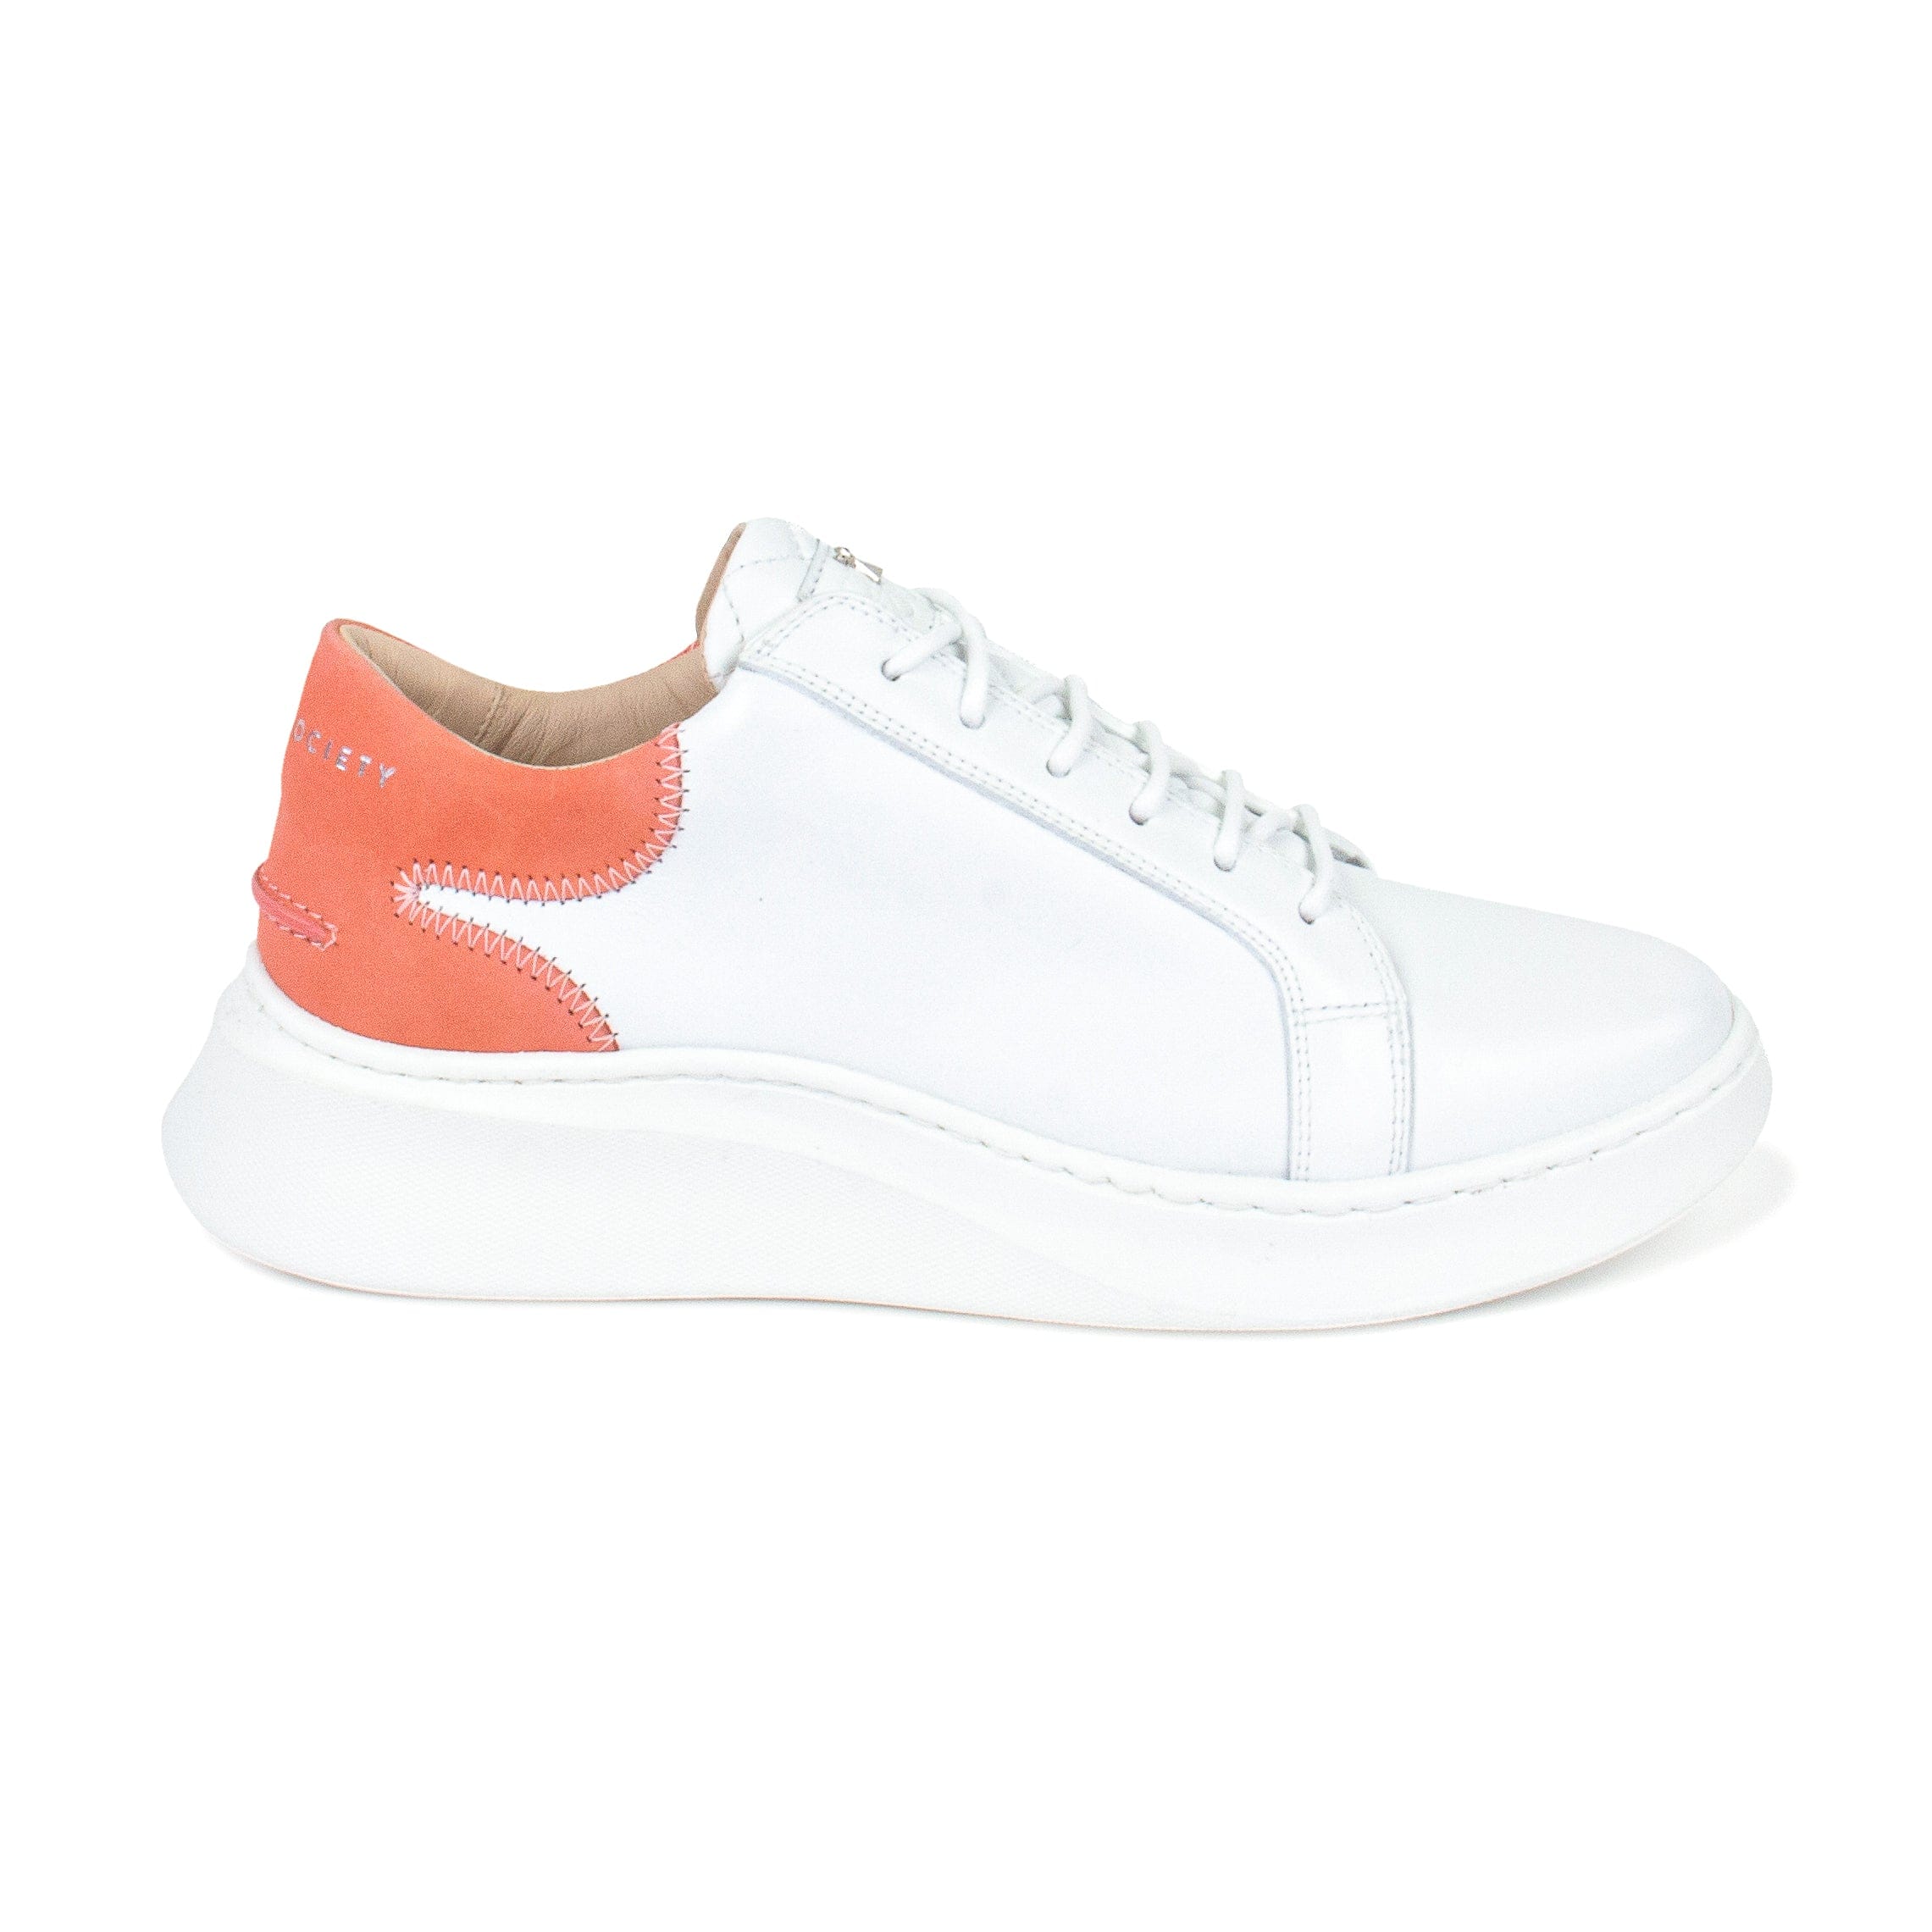 Matteo Low Top Sneaker | White & Rose Full Grain Leather | White Outsole | Made in Italy